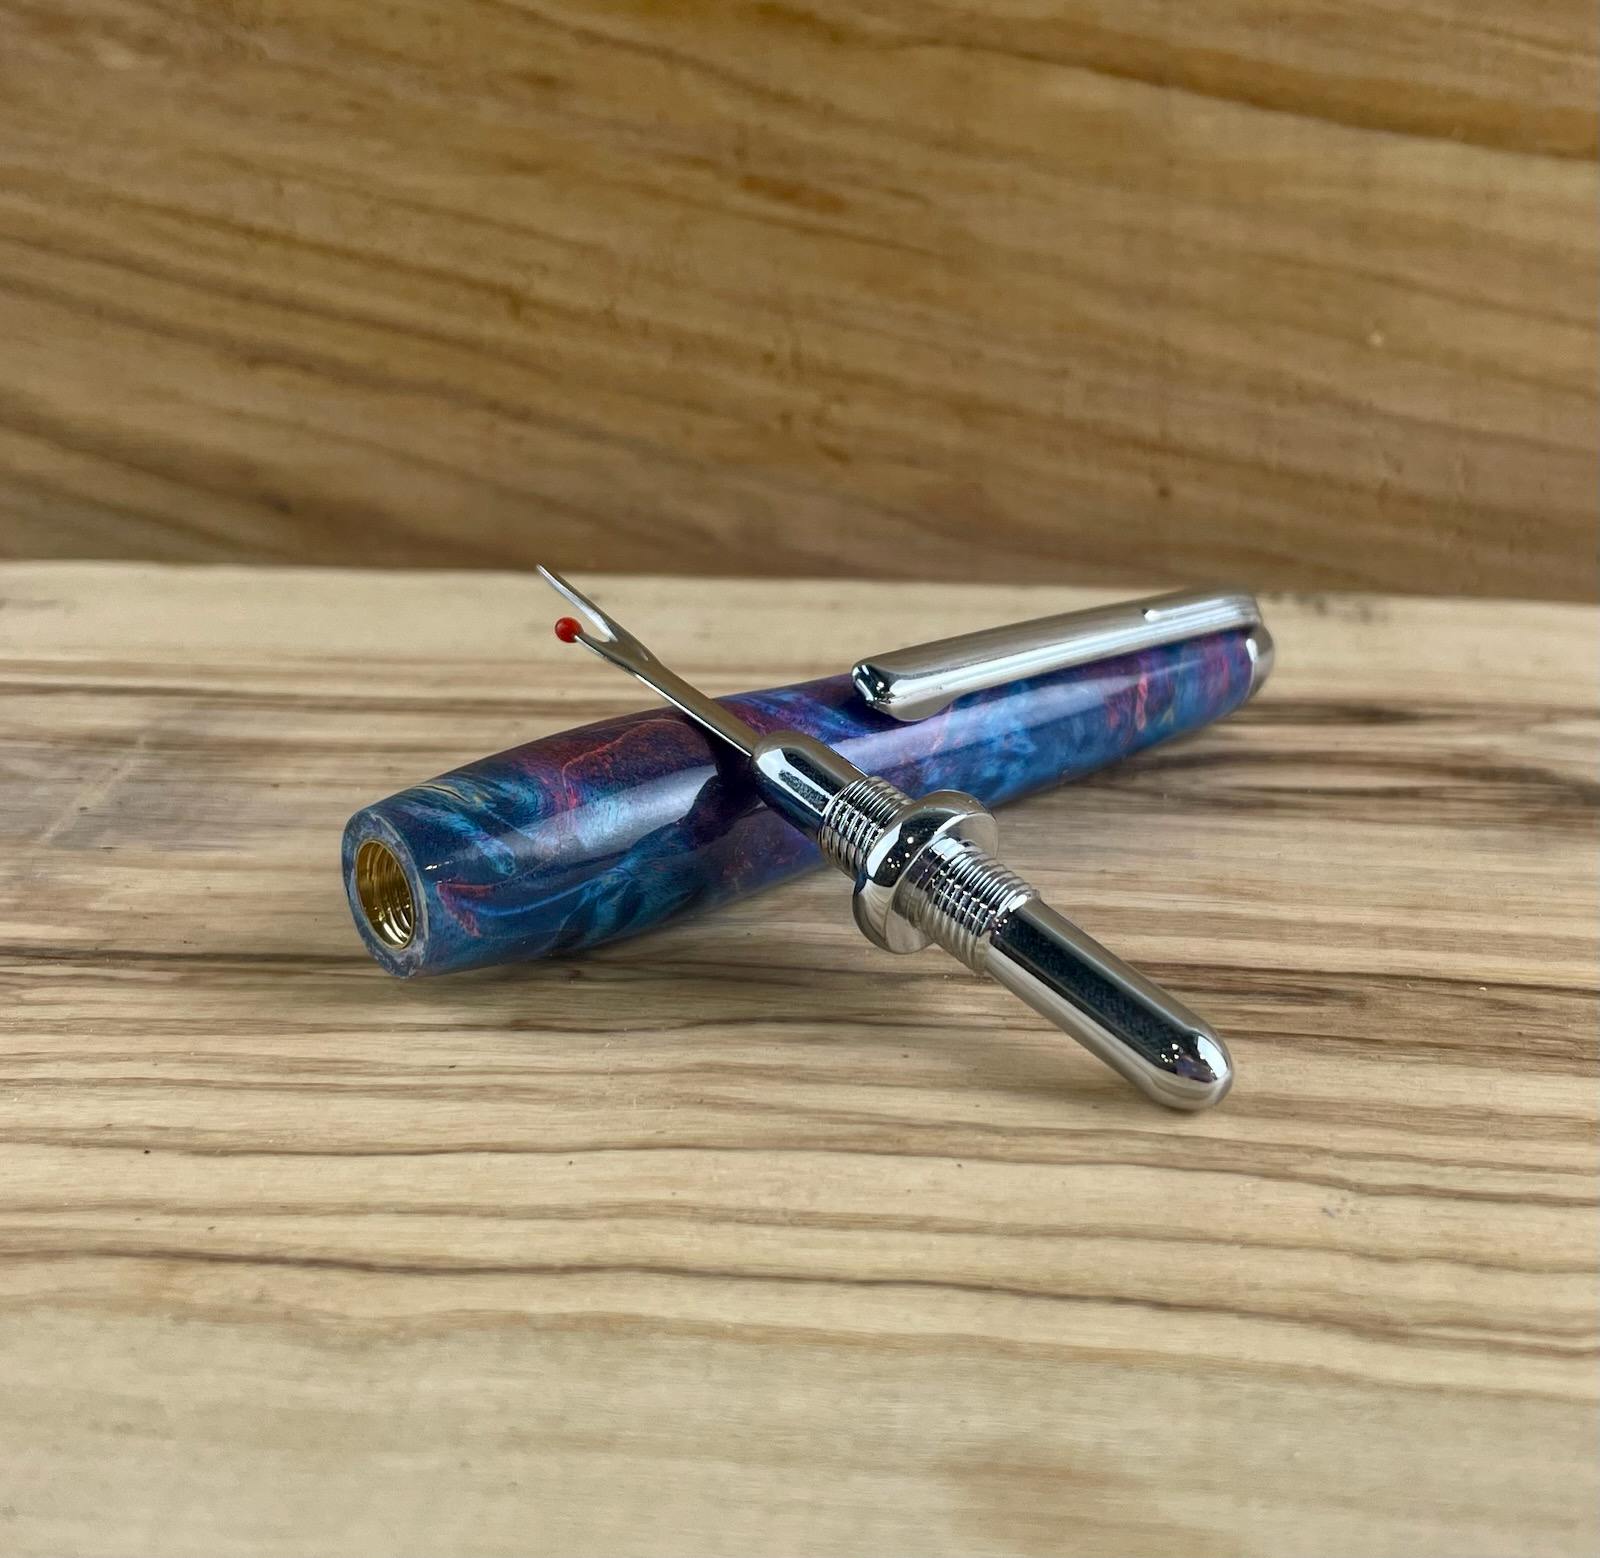 Single seam ripper project kit from William Wood-Write Ltd in chrome, made with stabilized Buckeye Burl wood pen blank in doubled dyed blue and pink